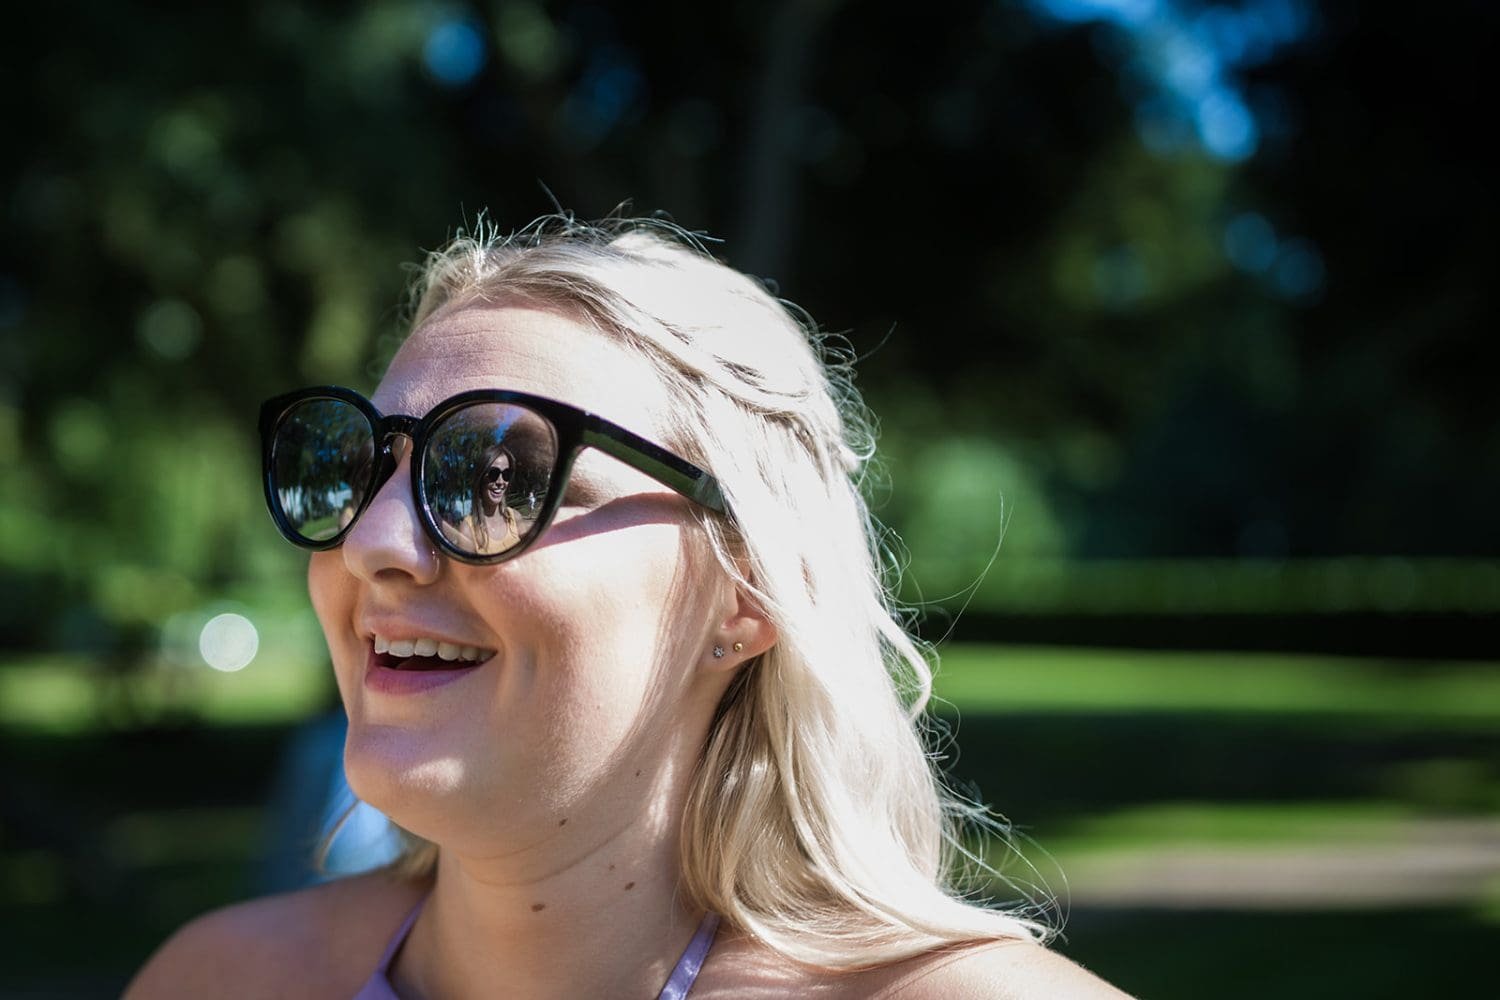 guests laughs while her friend is reflected in her sunglasses